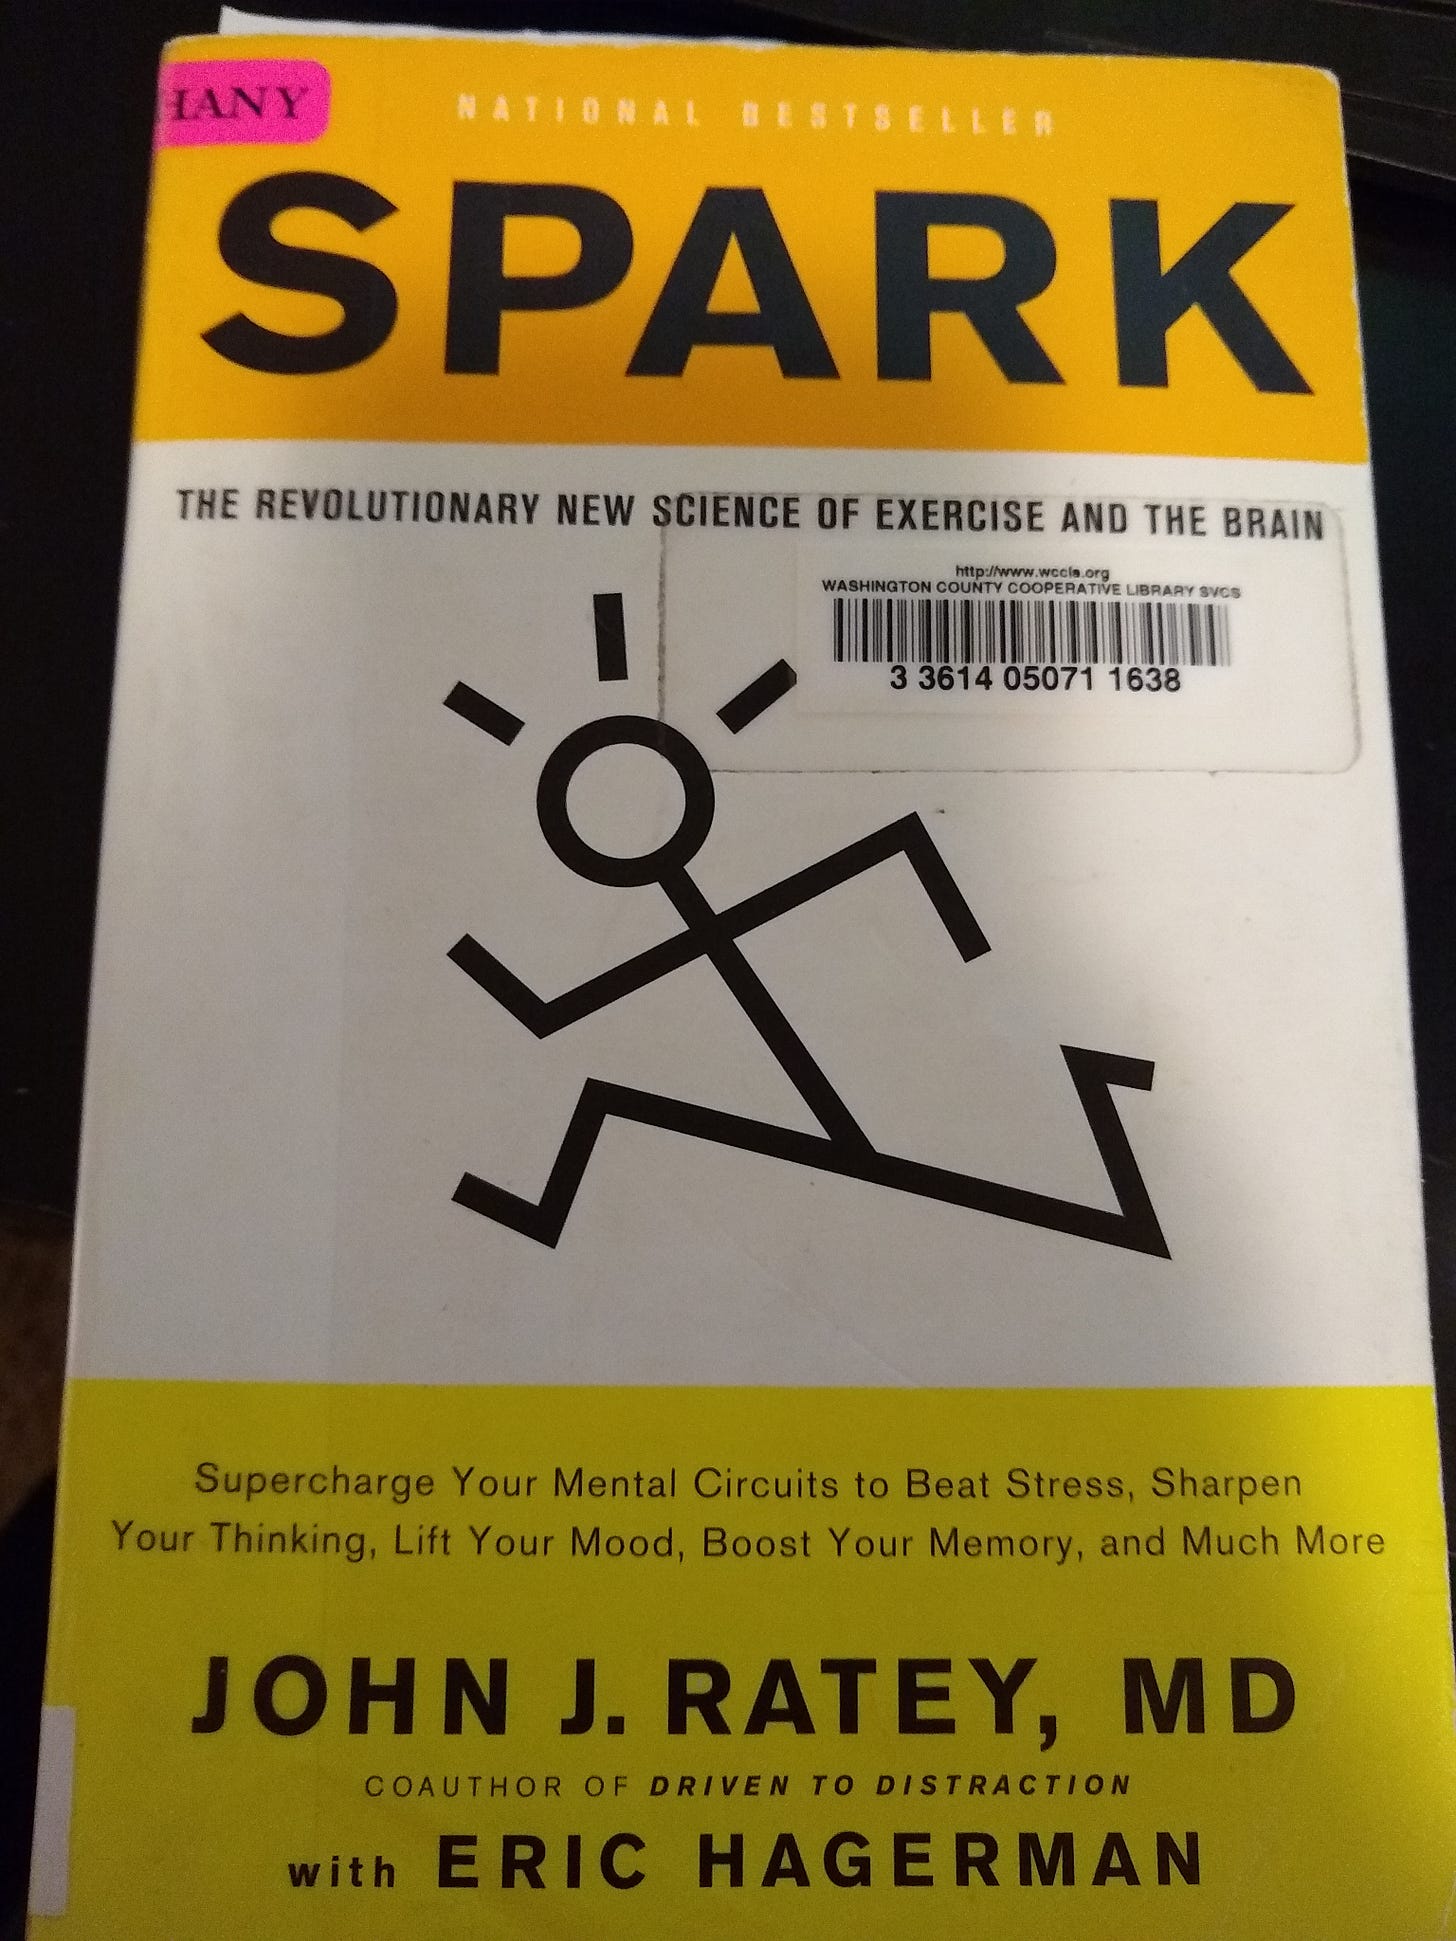 Spark: The Revolutionary New Science of Exercise and the Brain by John J. Ratey, MD, with Eric Hagerman